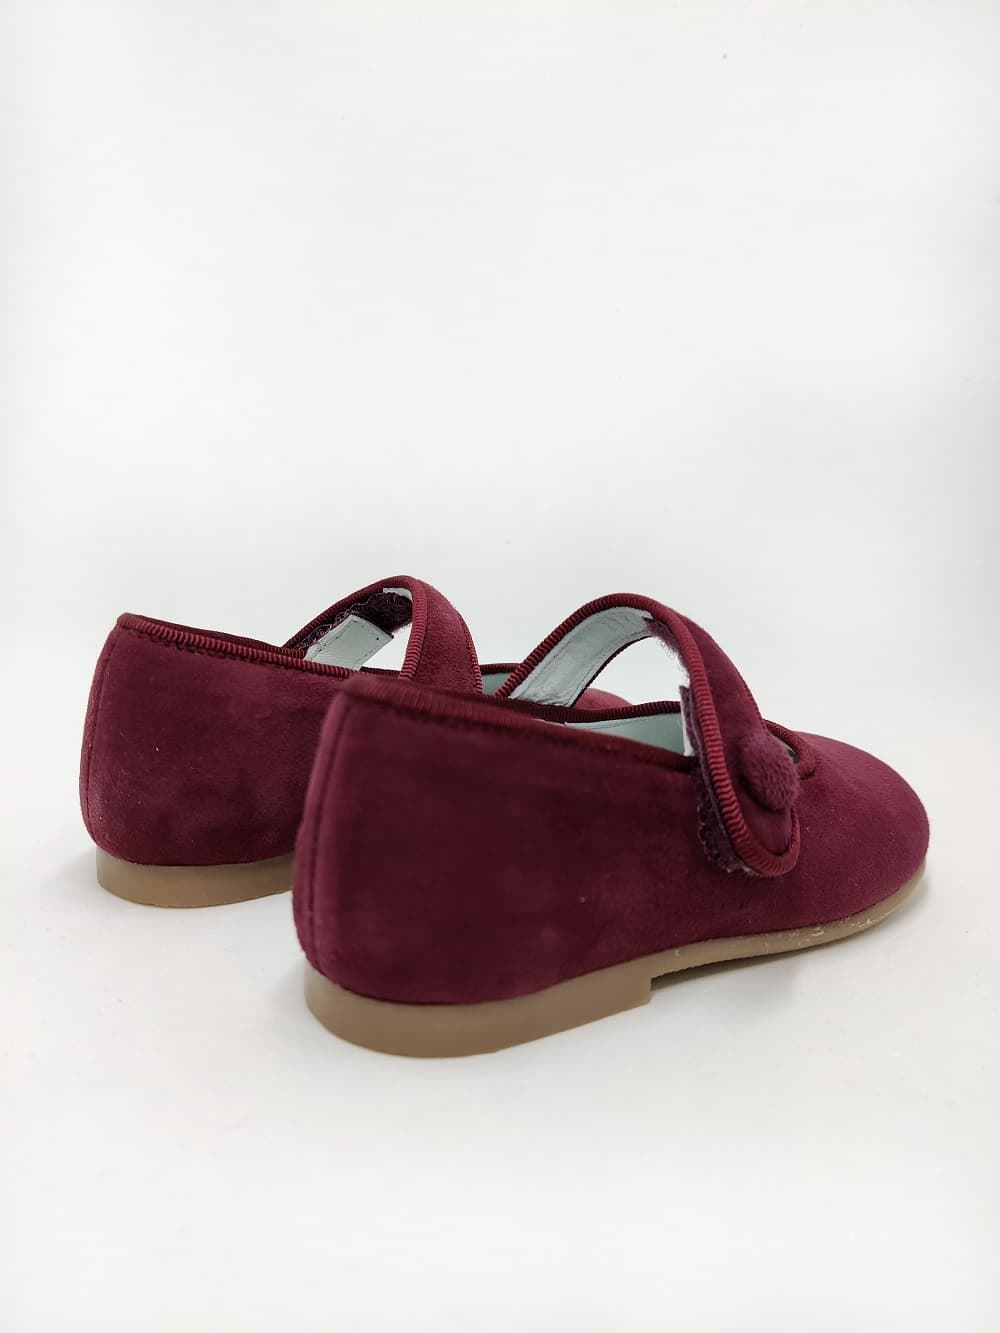 Pirufin (Piruflex) Mary Janes for baby girls in Bordeaux suede - Image 3